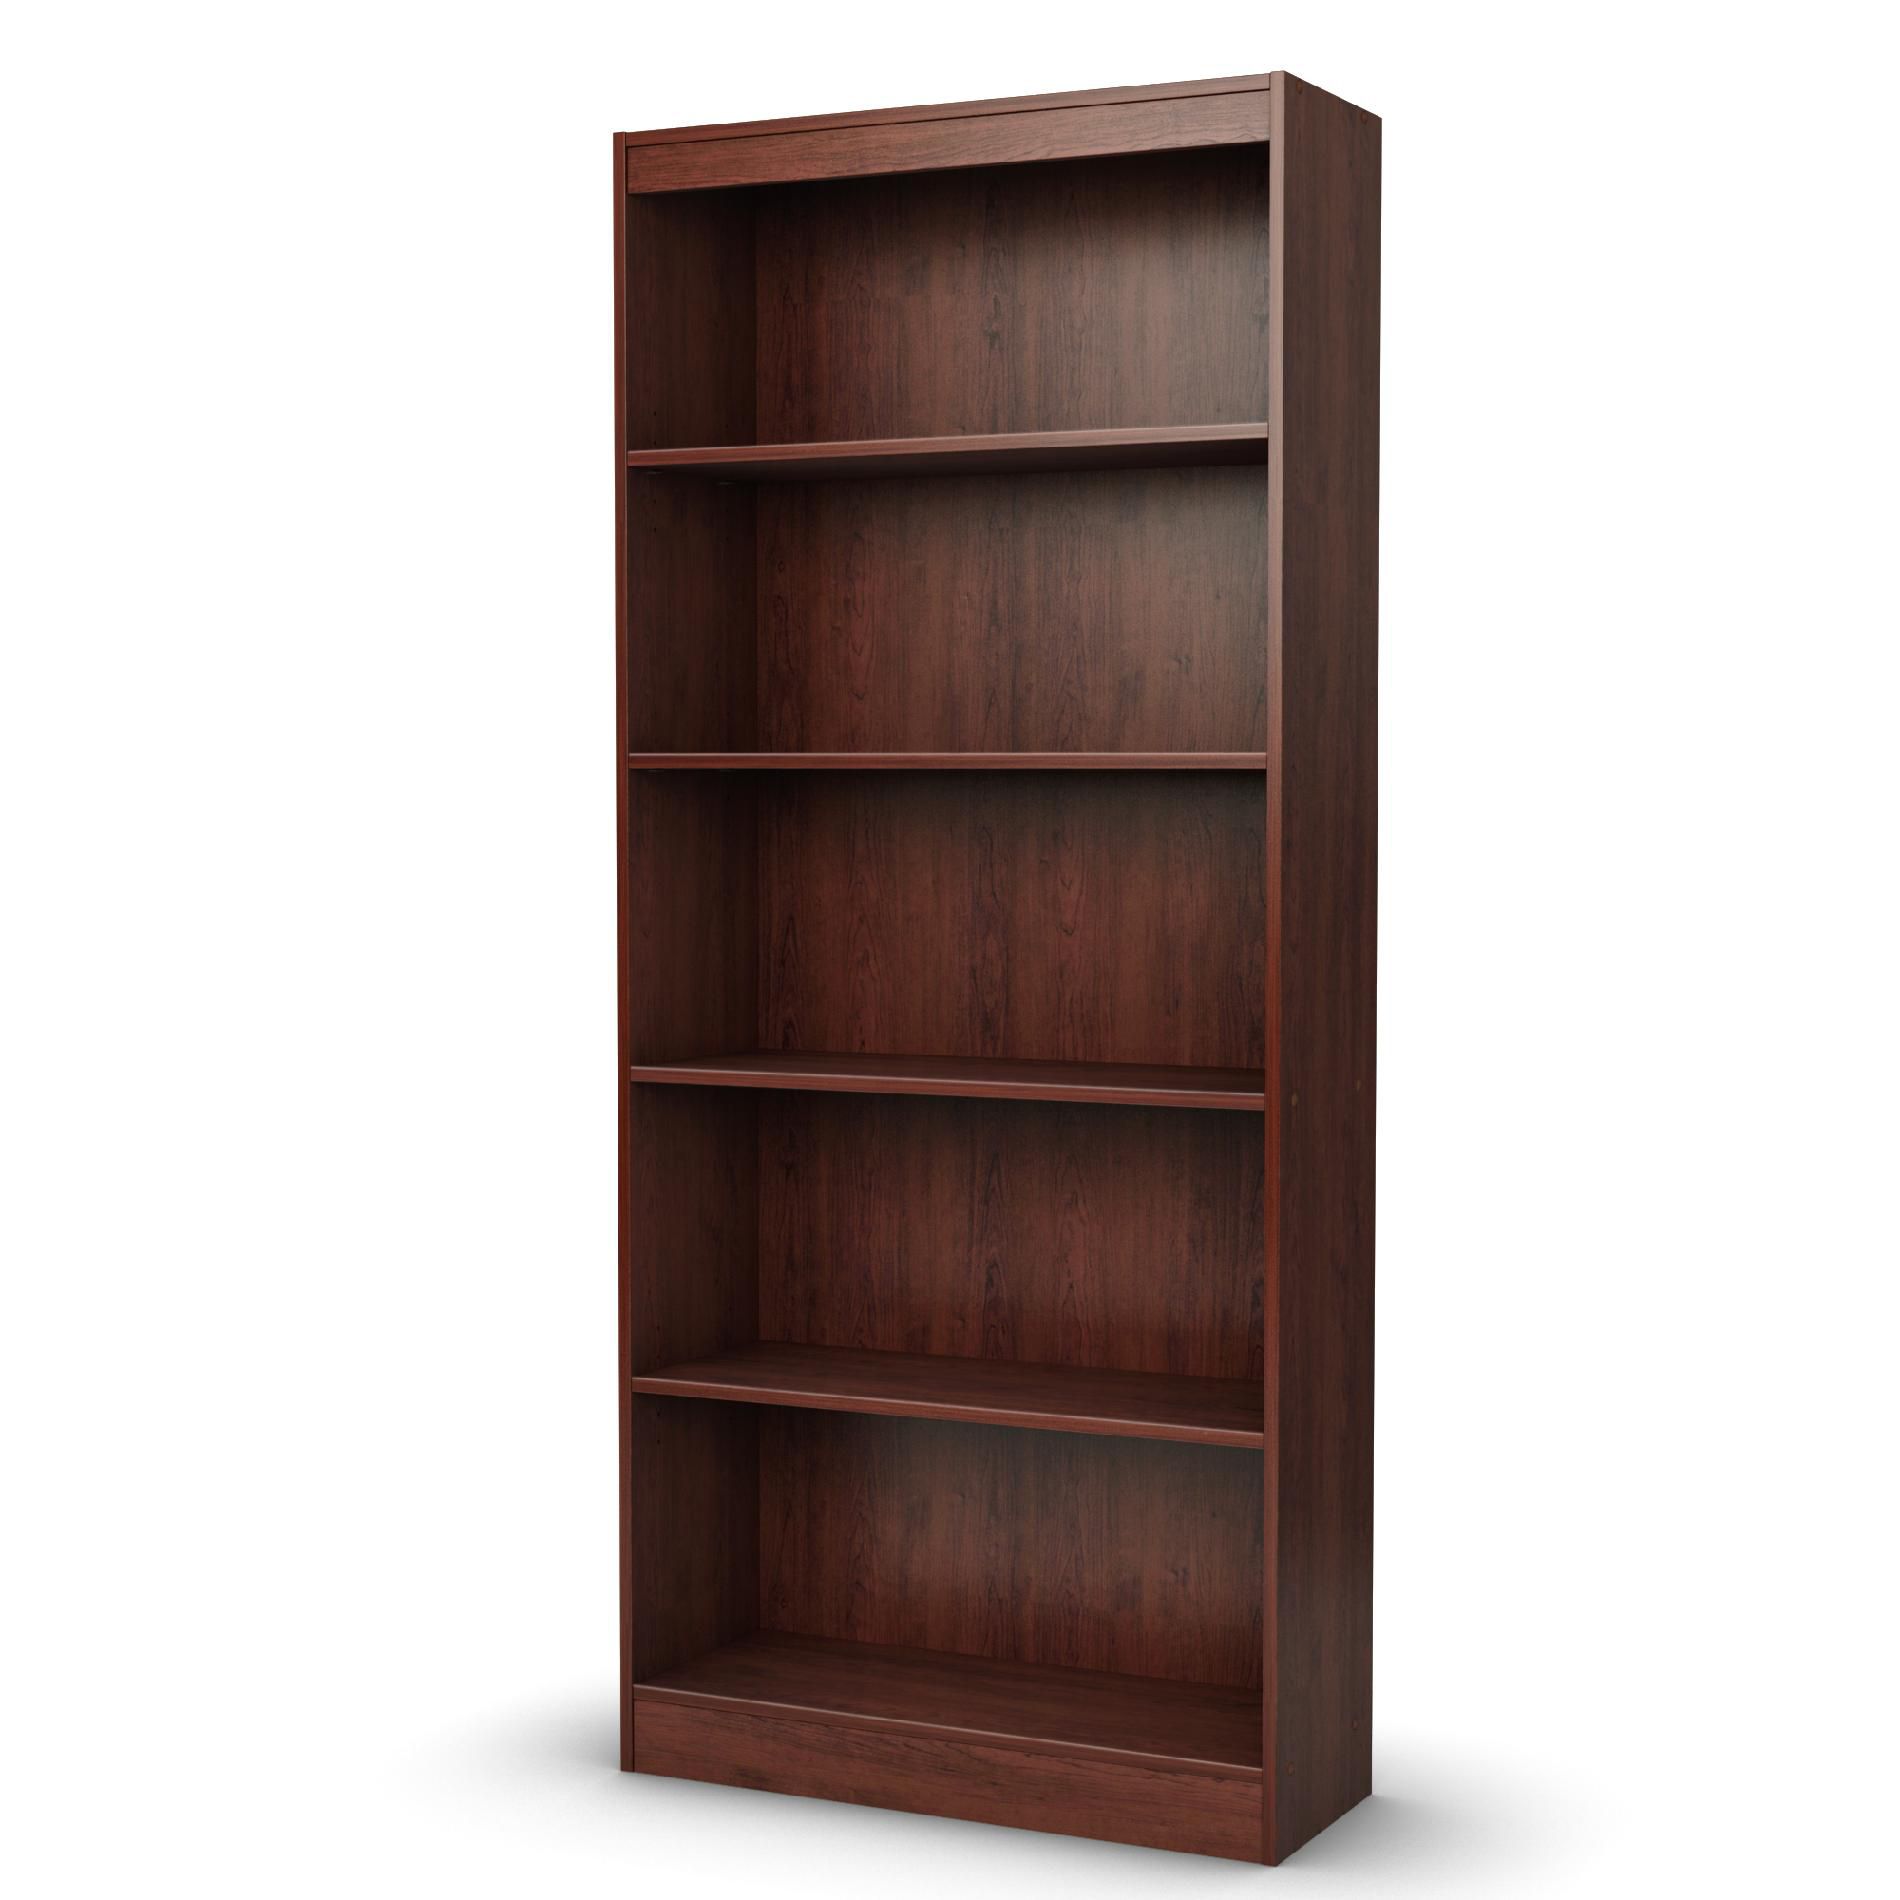  Shelf Wood Bookcase, Cinnamon Cherry Finish Sears Outlet